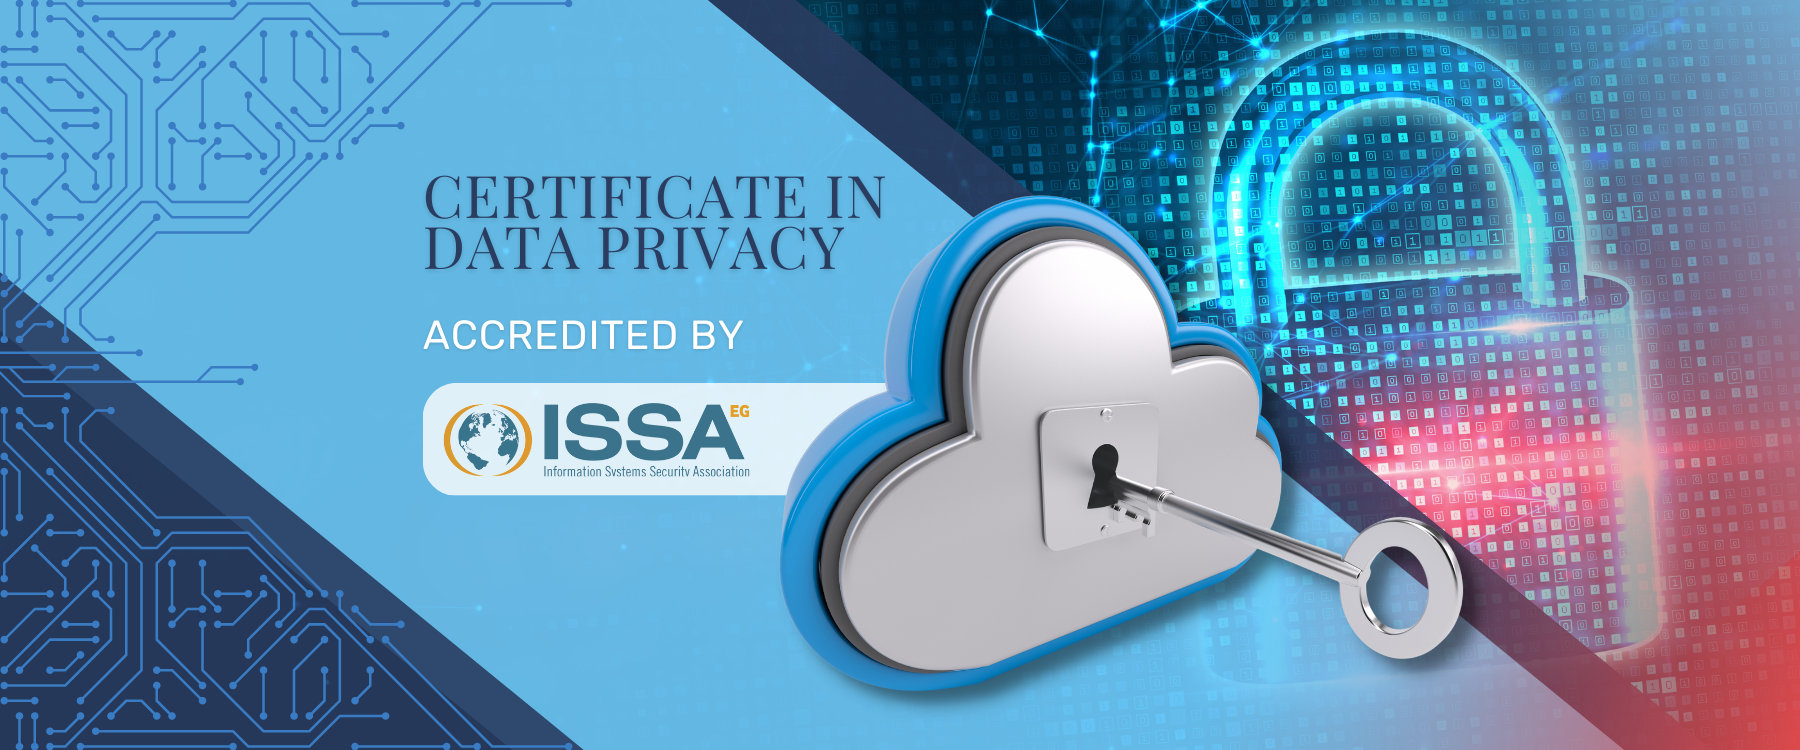 Certificate In Data Privacy And Security